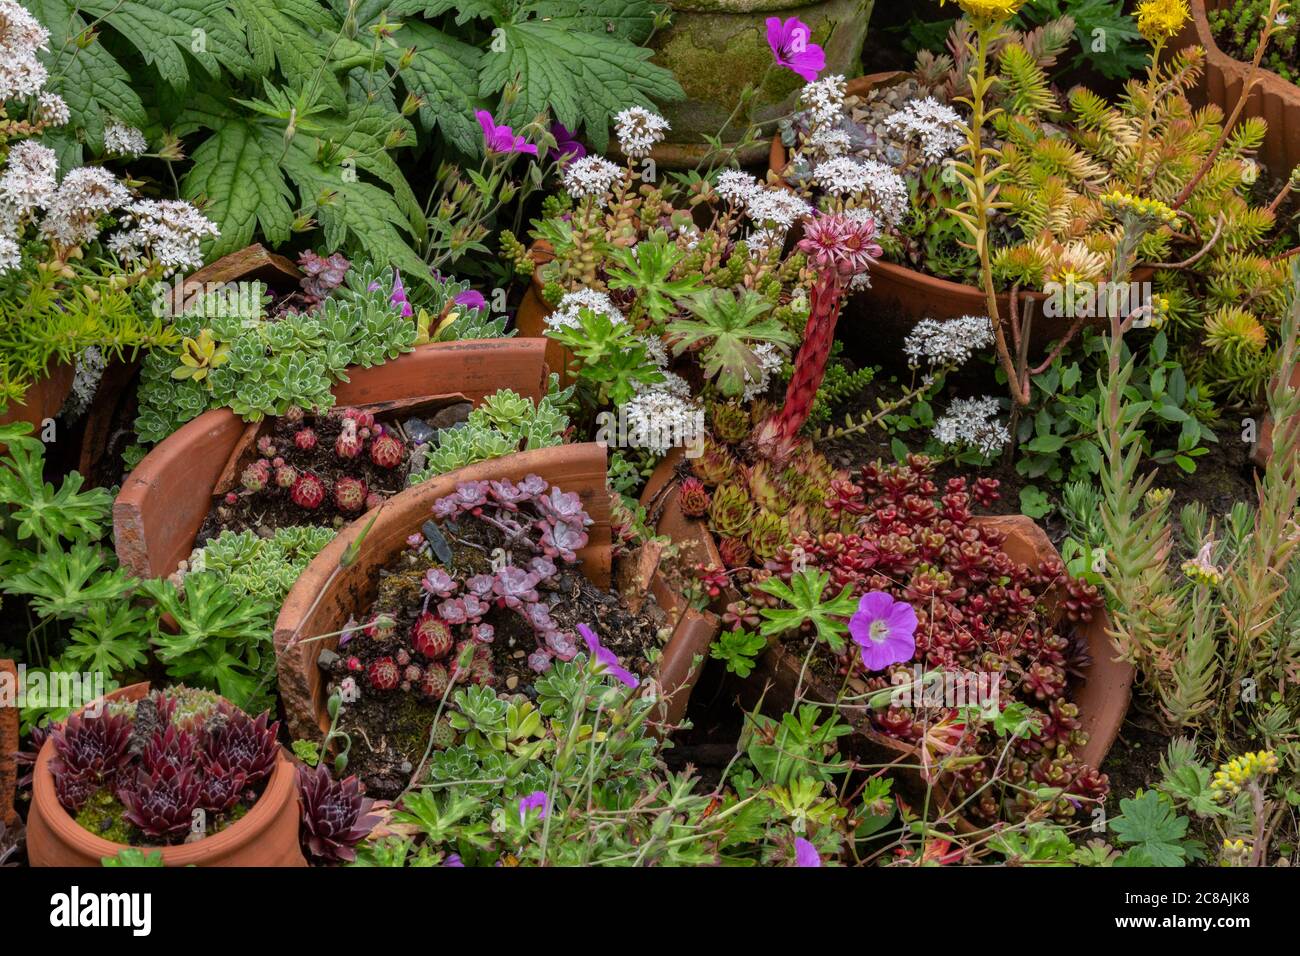 Mixed succulent plants growing amongst clay pots in a garden border. Stock Photo